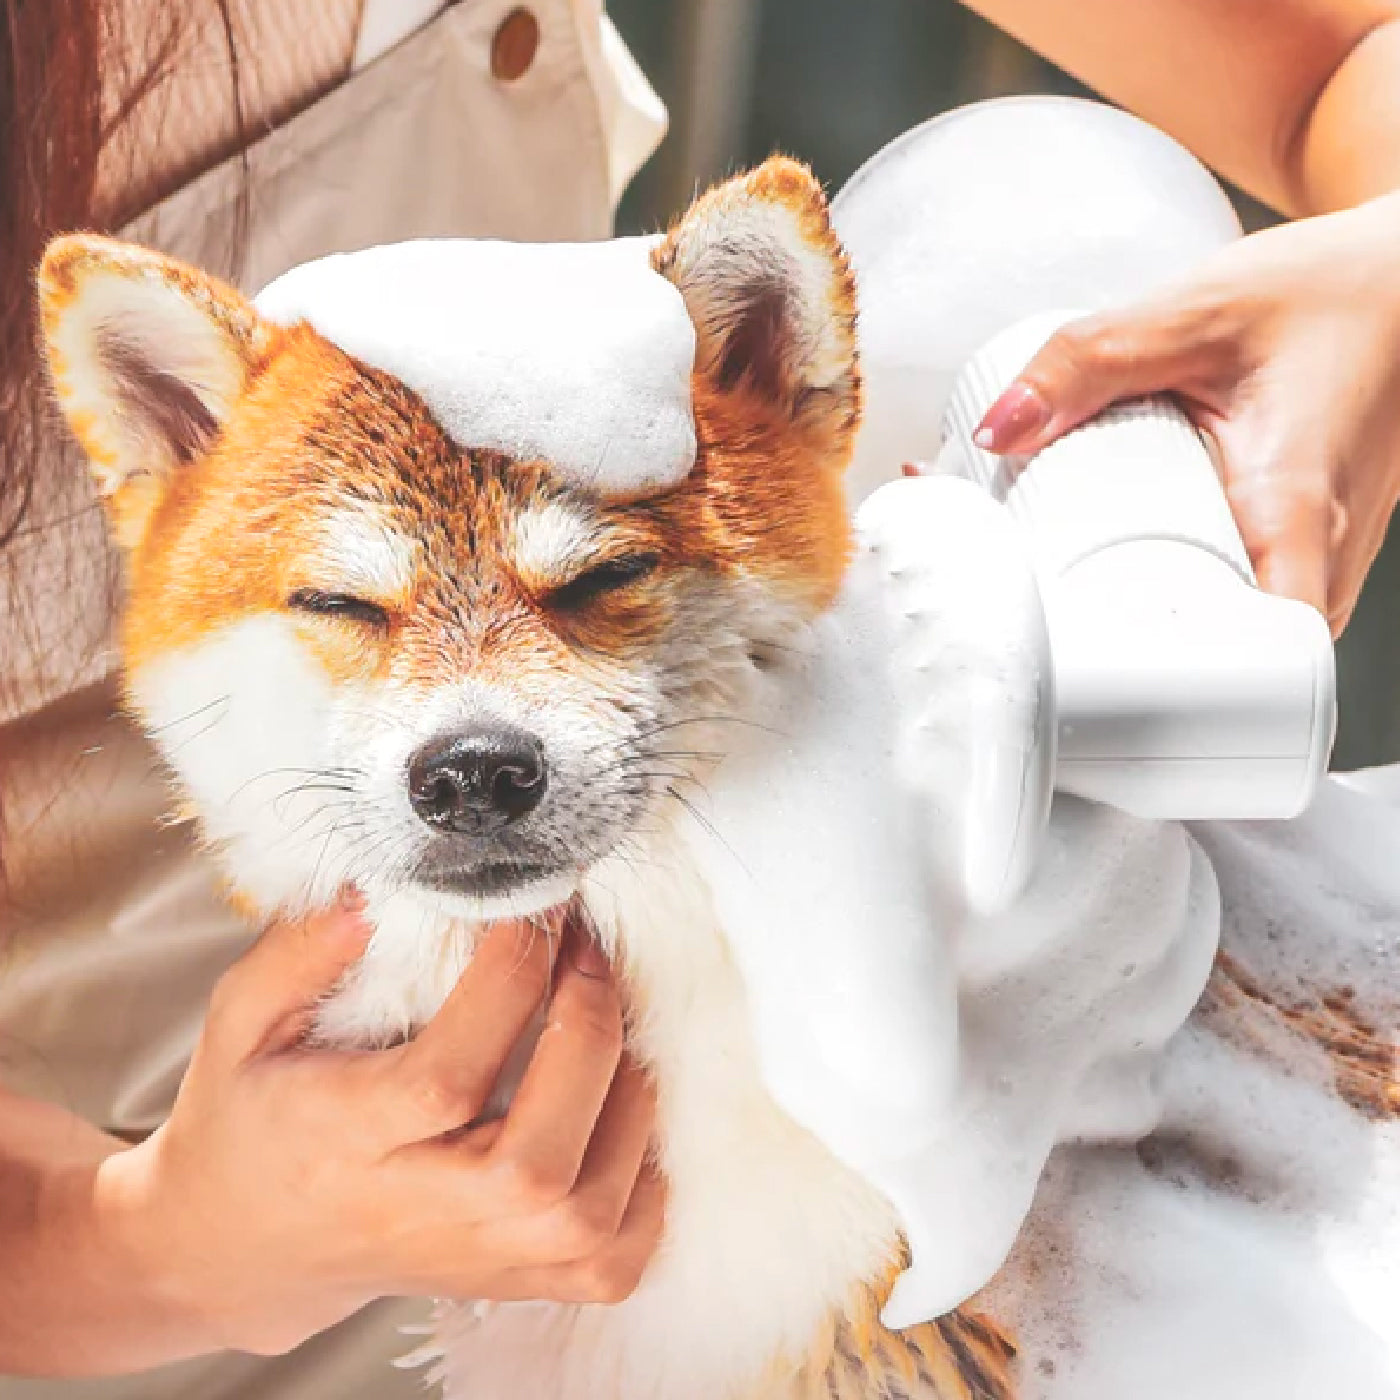 I am sorry, but you may be bathing your dog in a wrong way!